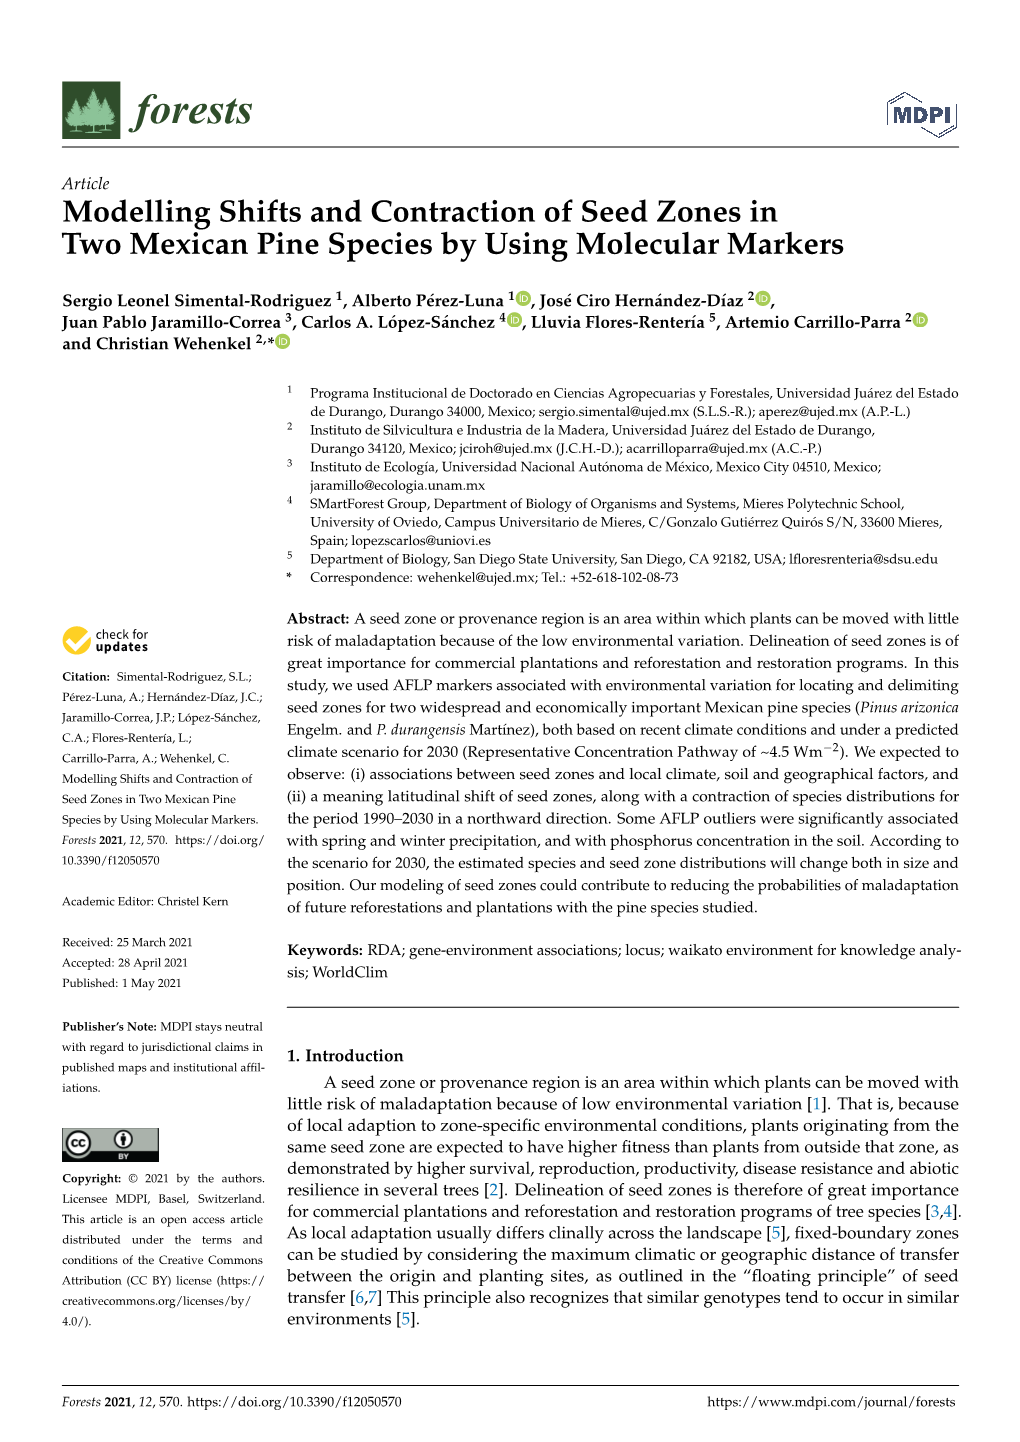 Modelling Shifts and Contraction of Seed Zones in Two Mexican Pine Species by Using Molecular Markers